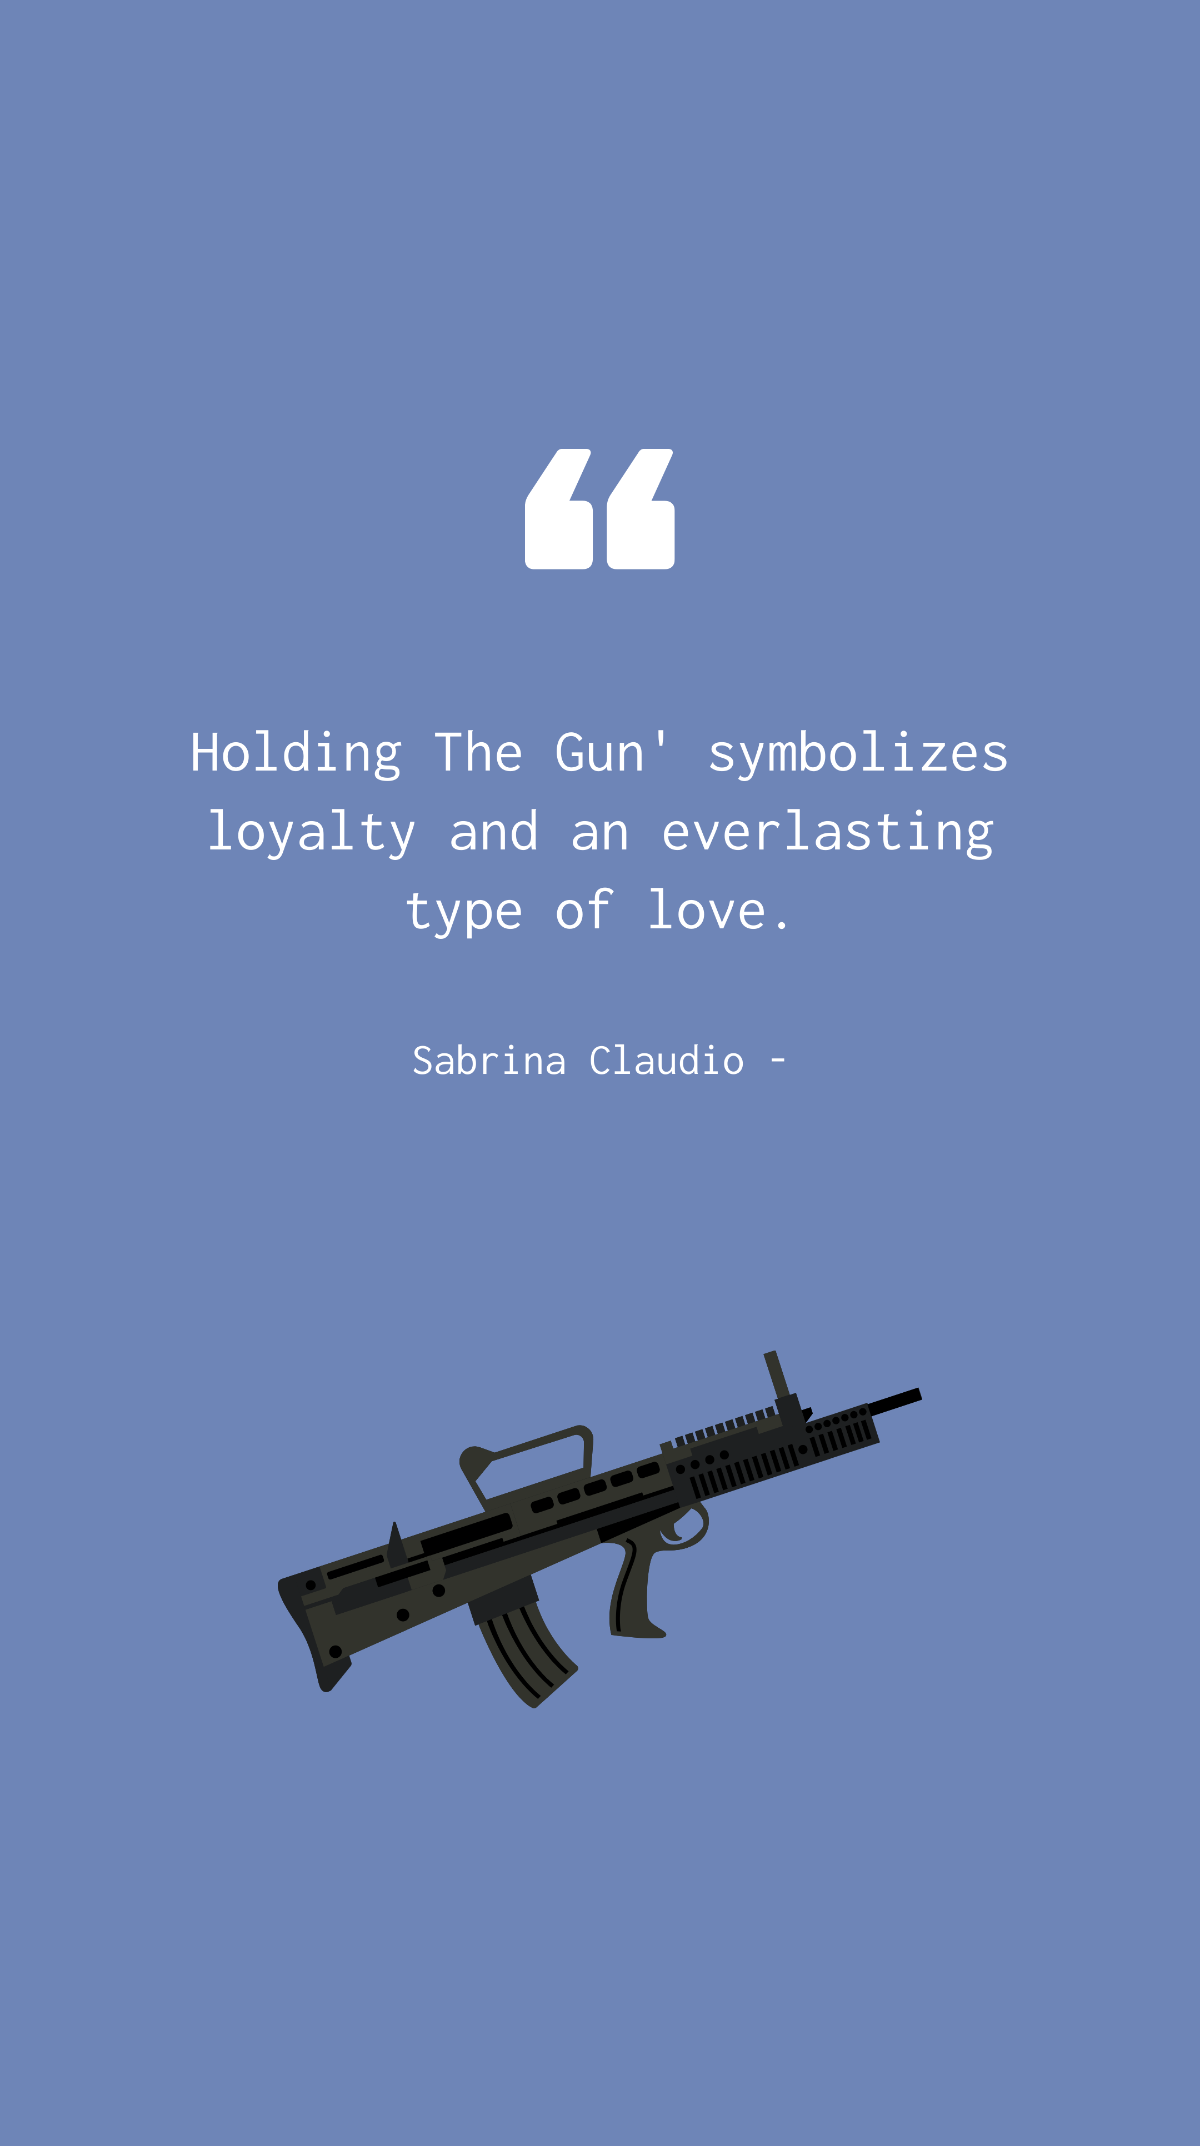 Sabrina Claudio - Holding The Gun' symbolizes loyalty and an everlasting type of love.